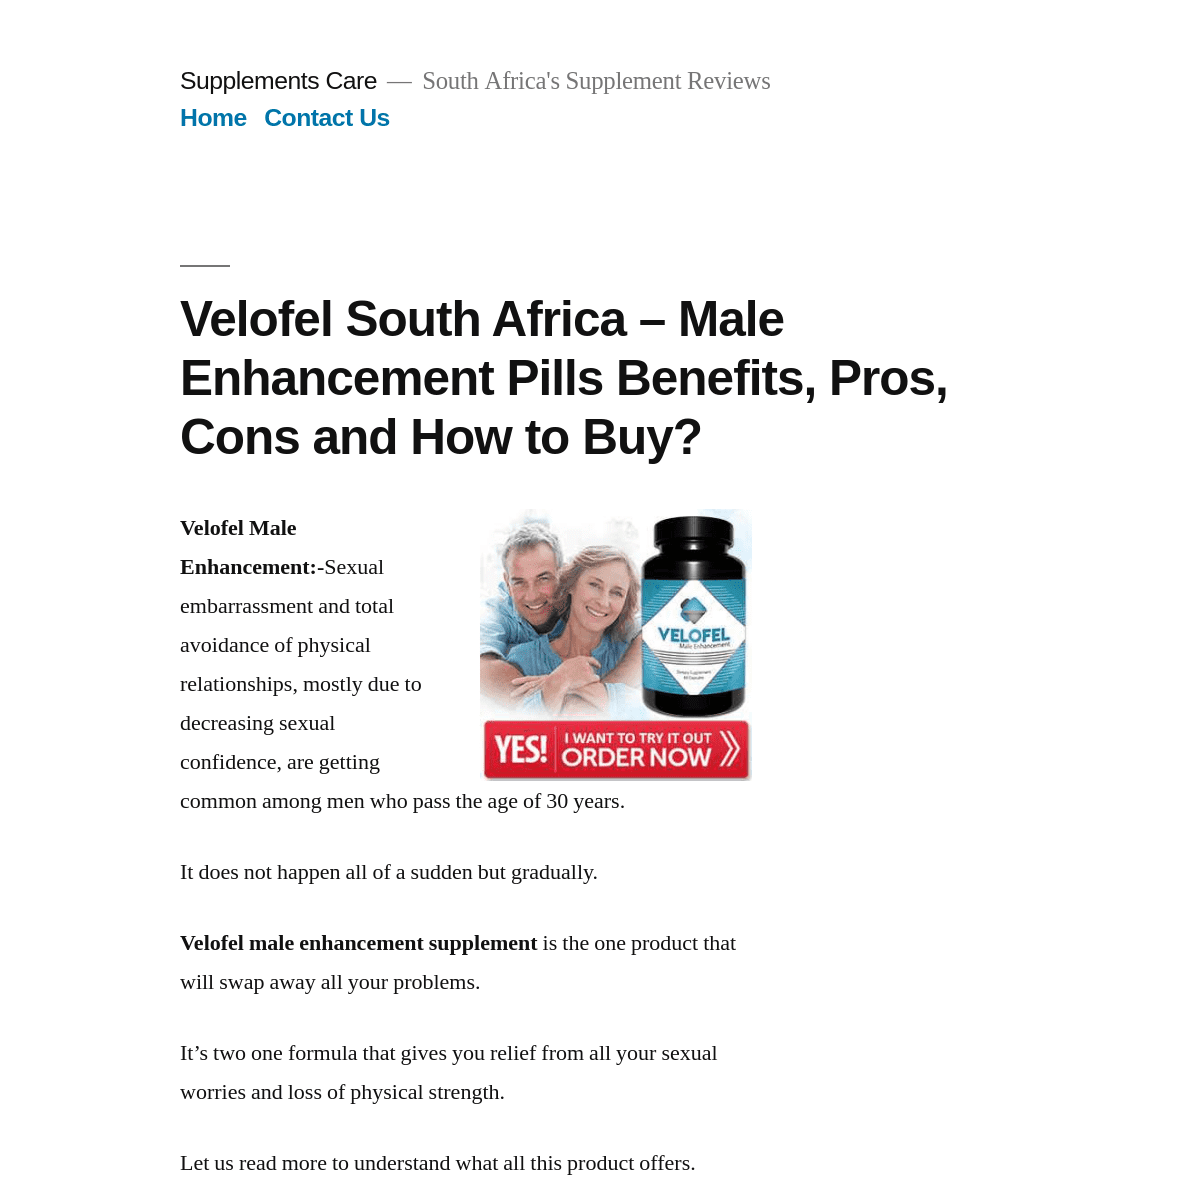 A complete backup of supplementscare.co.za